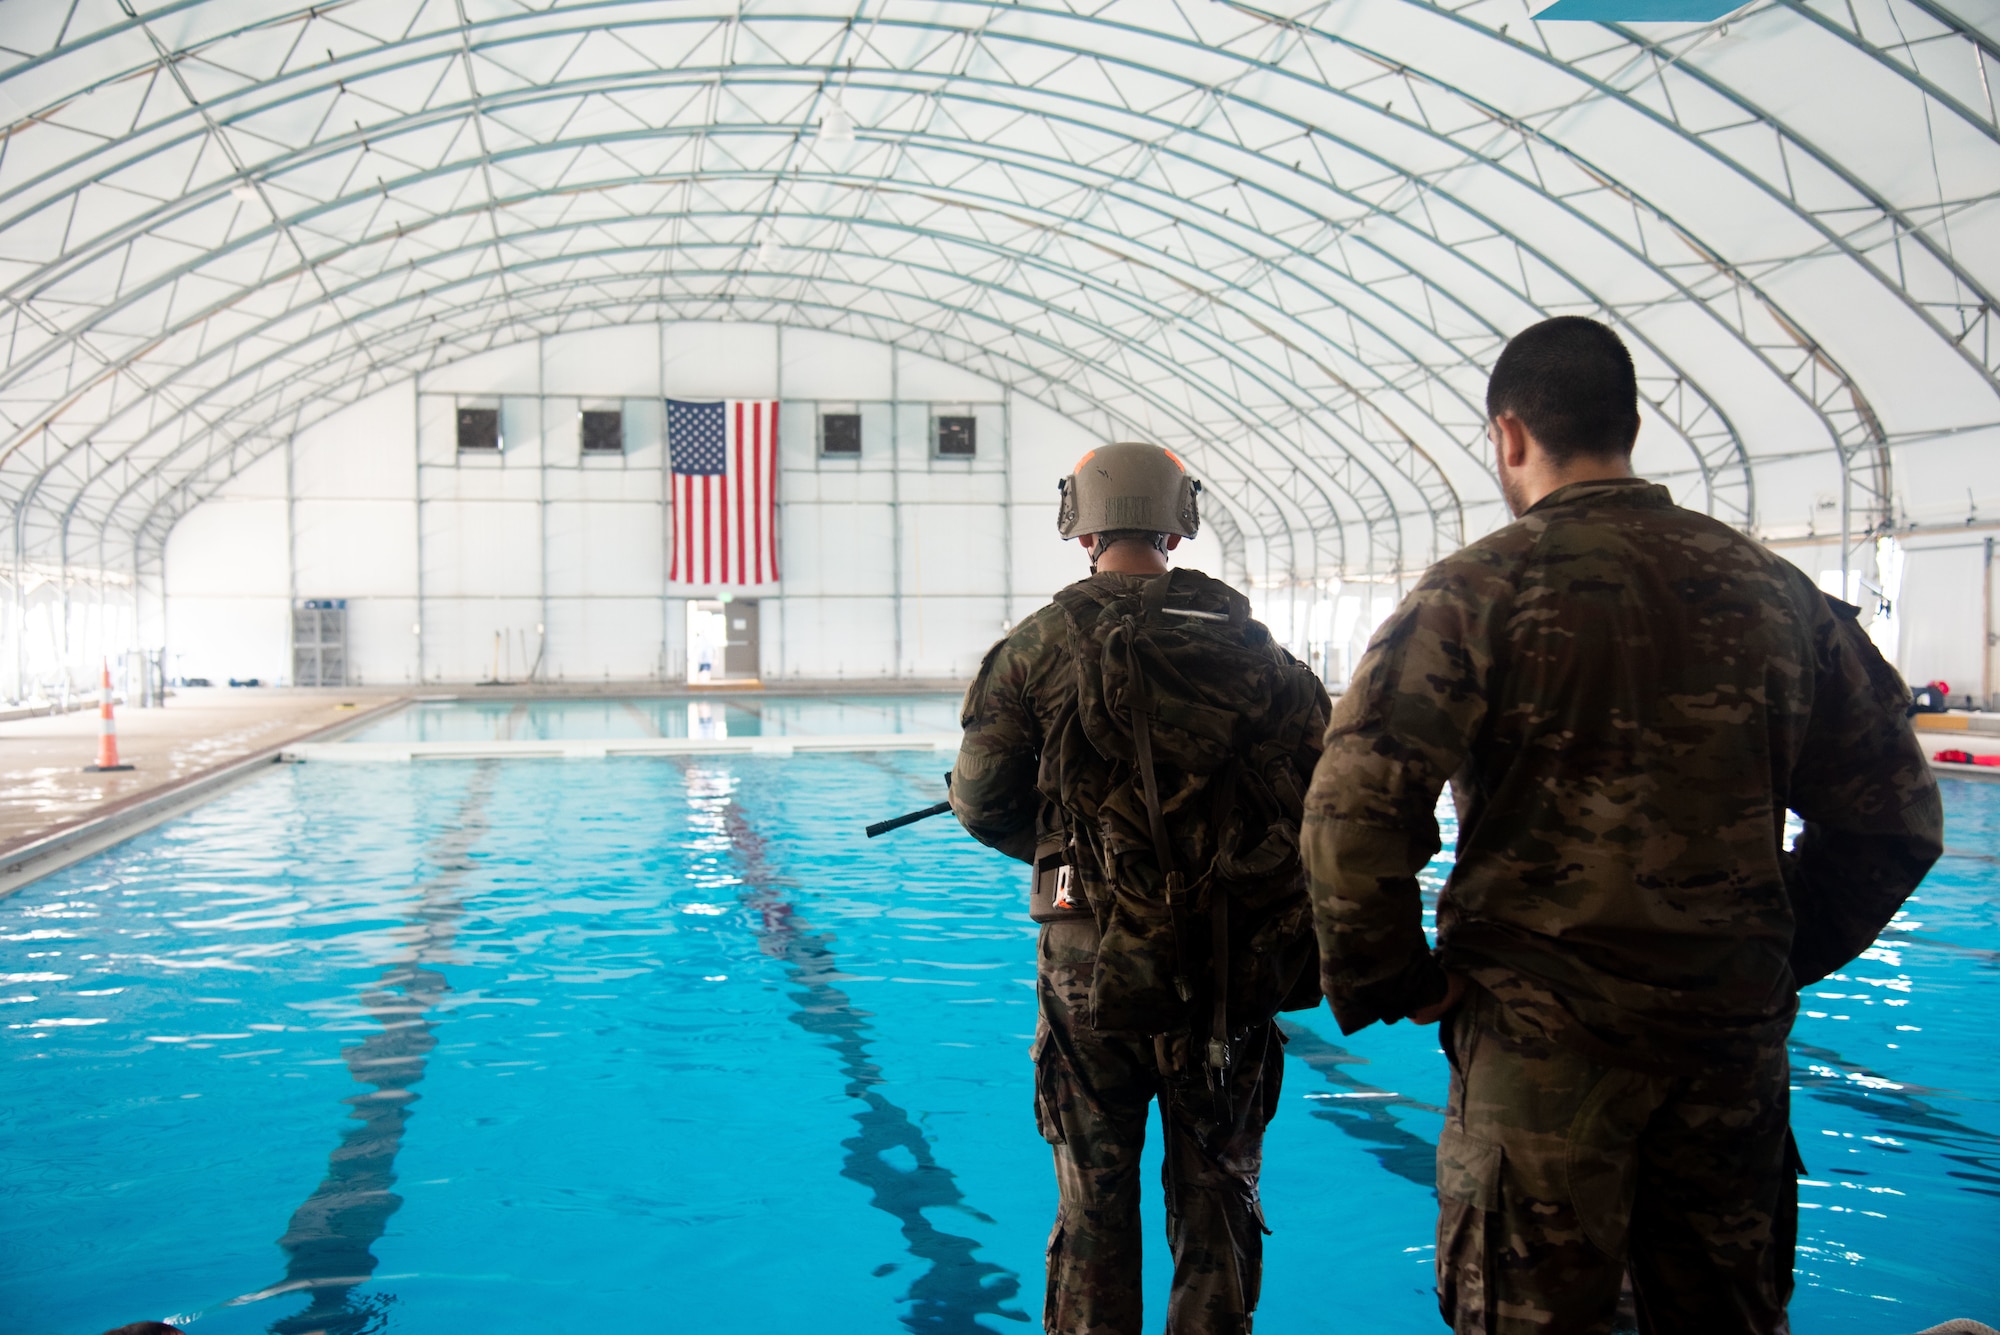 Airmen in full tactical gear stand next to pool